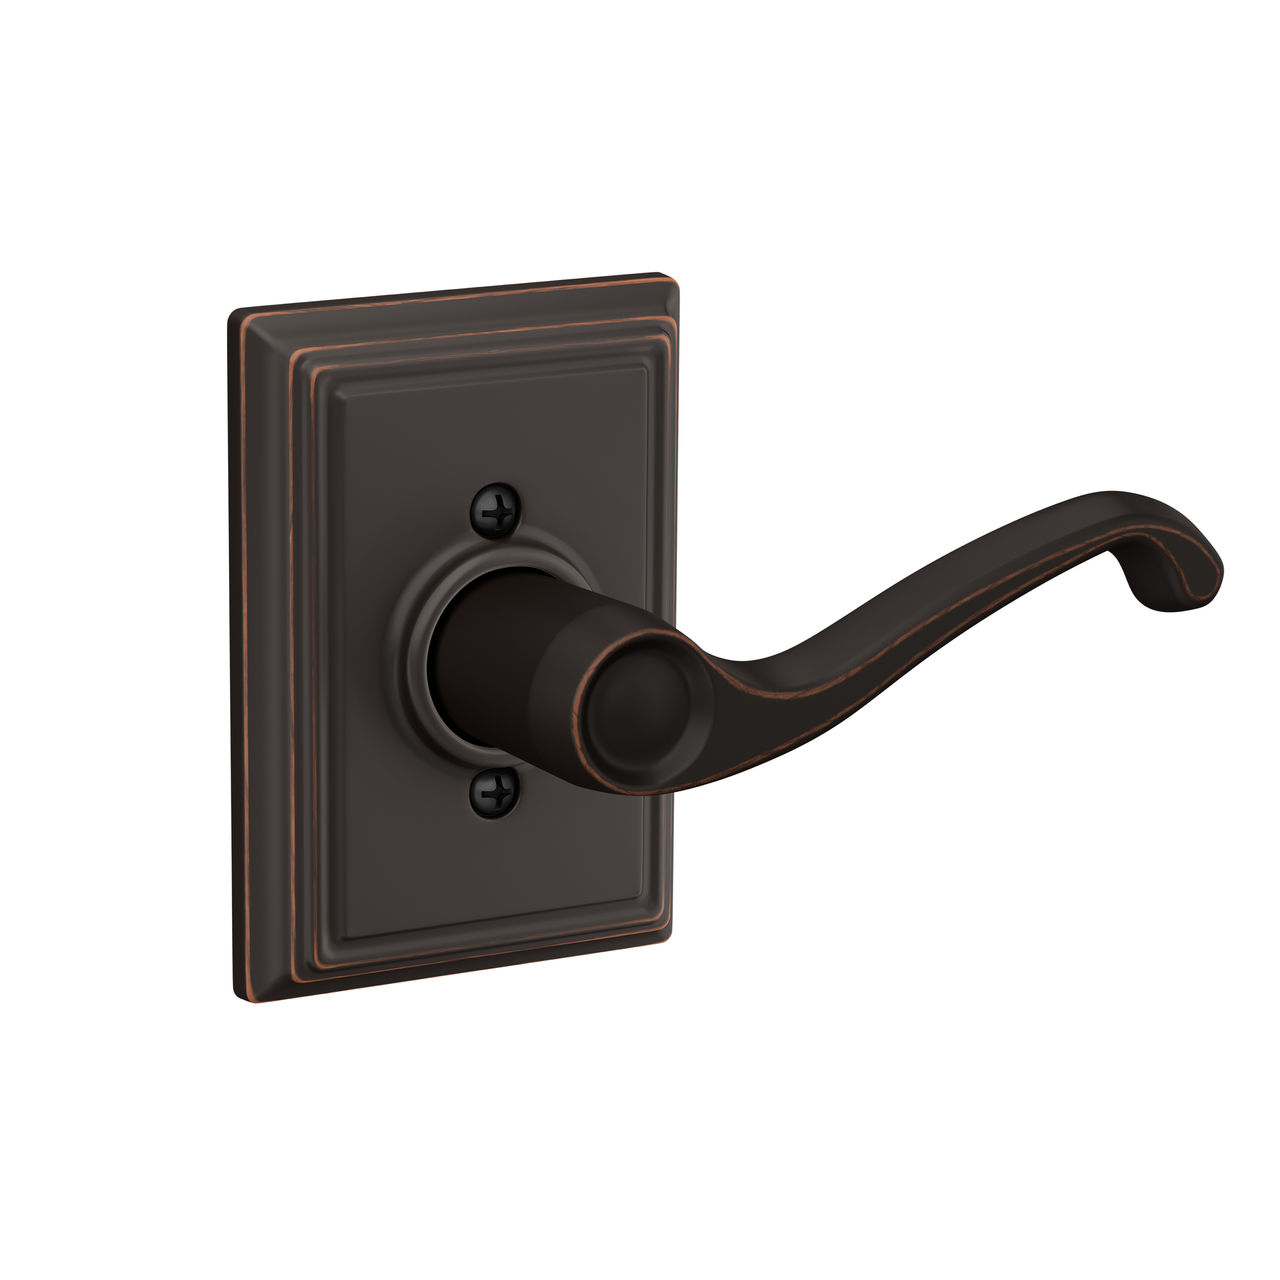 Flair Lever Non-Turning Lock